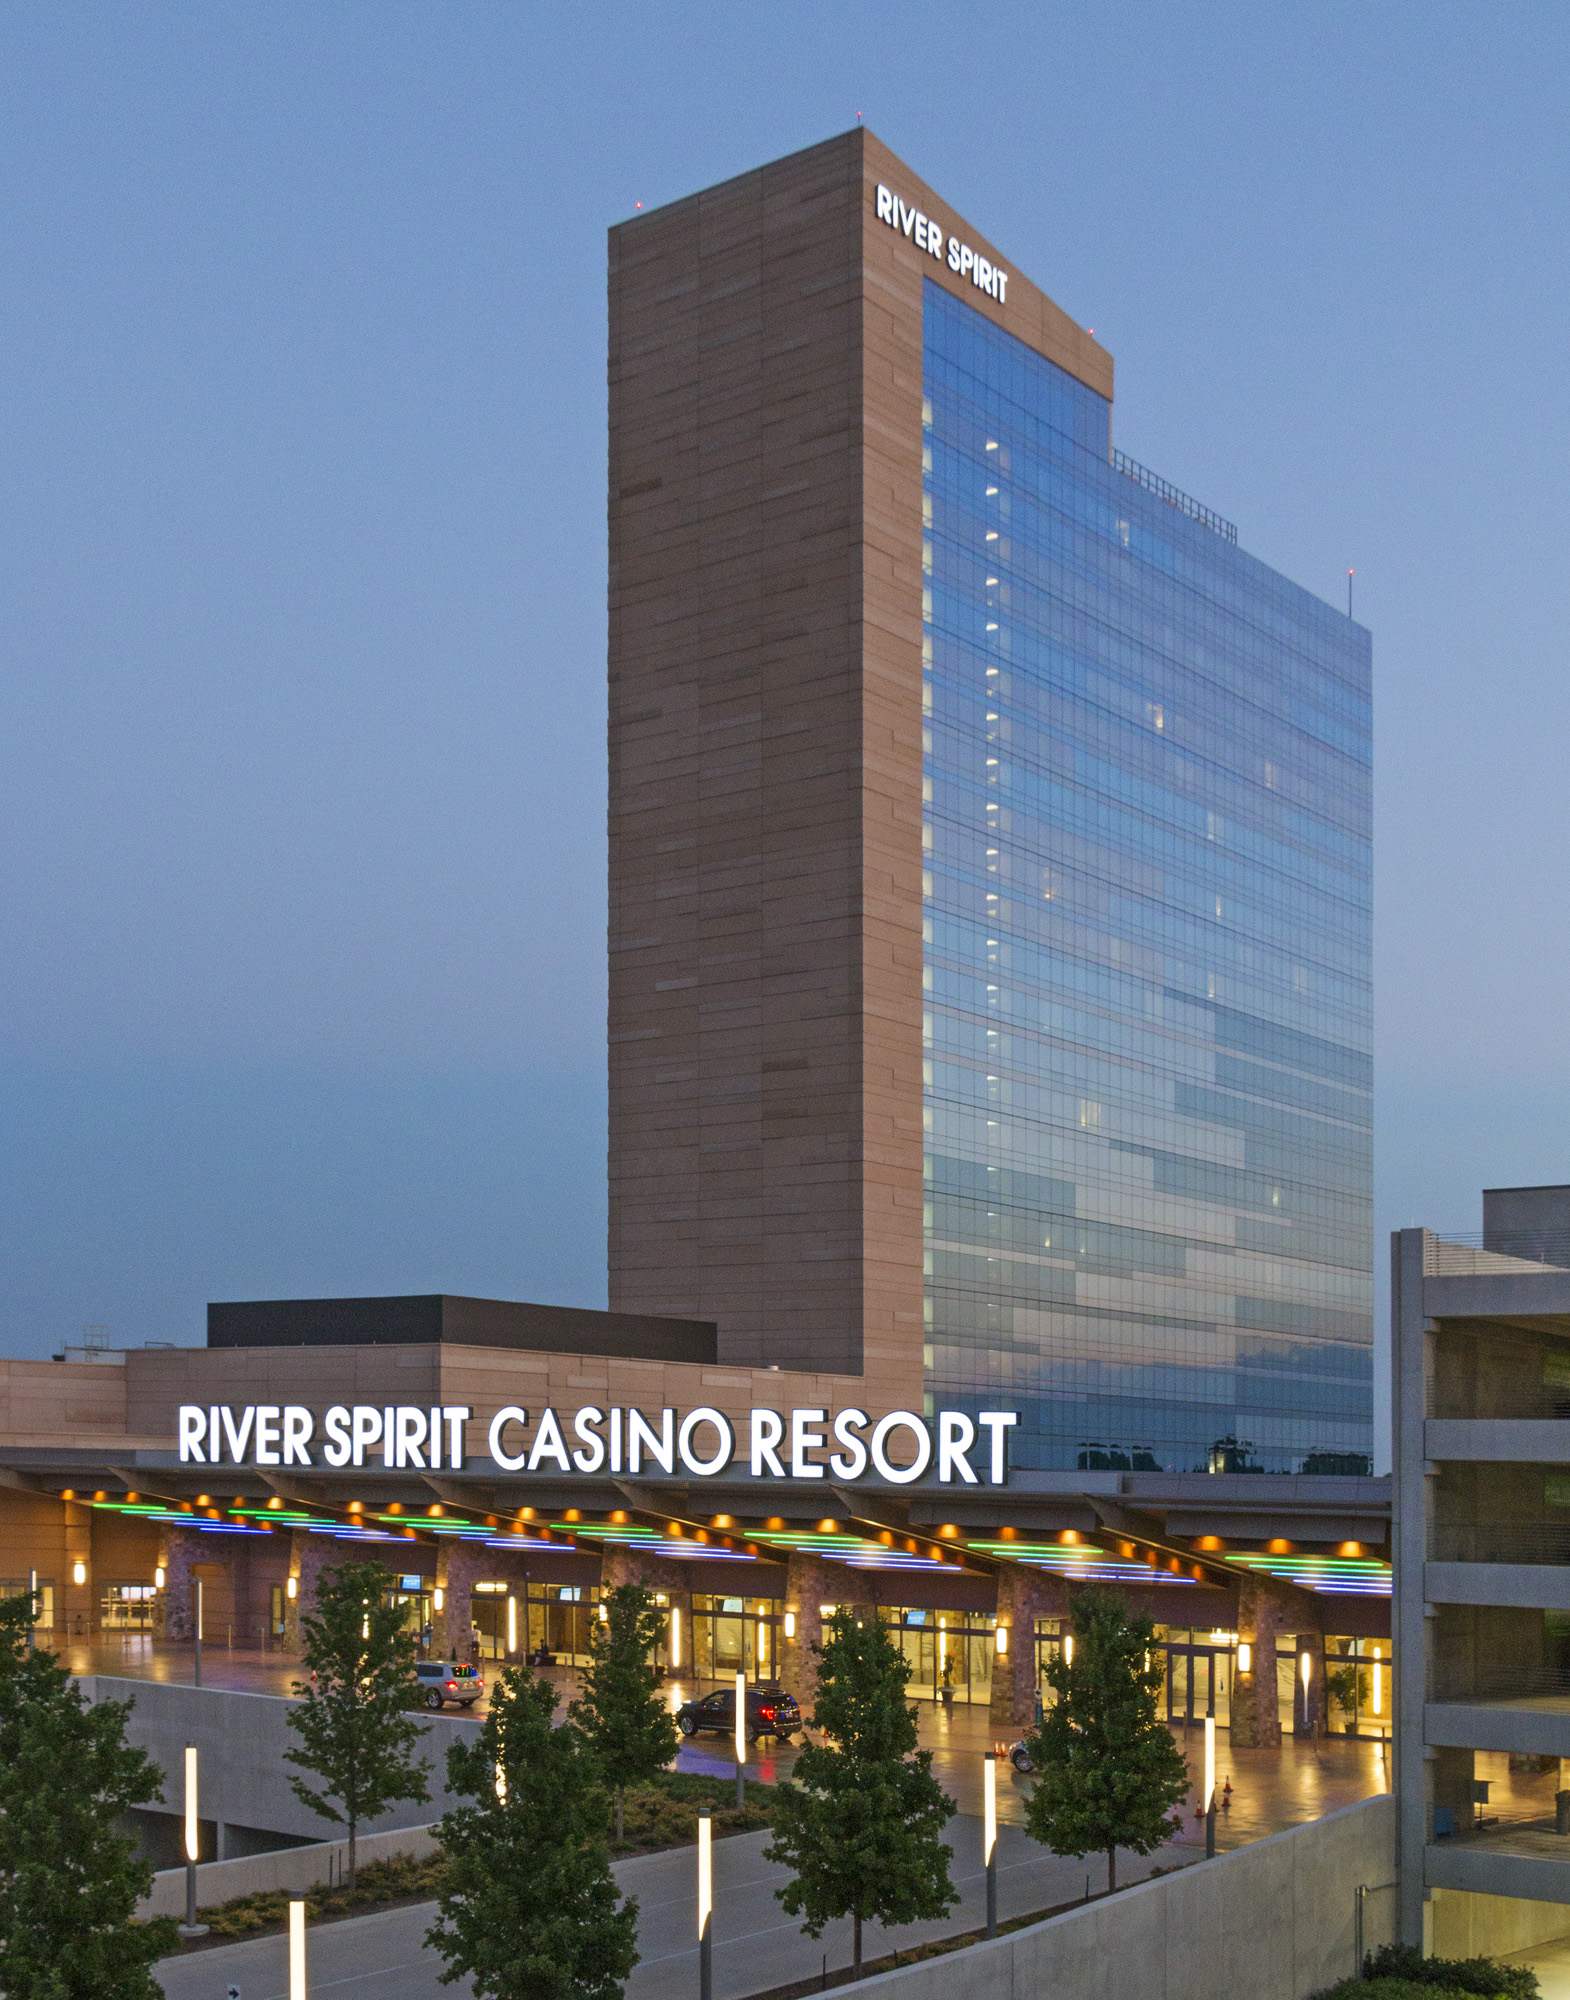 is the river spirit casino leaning